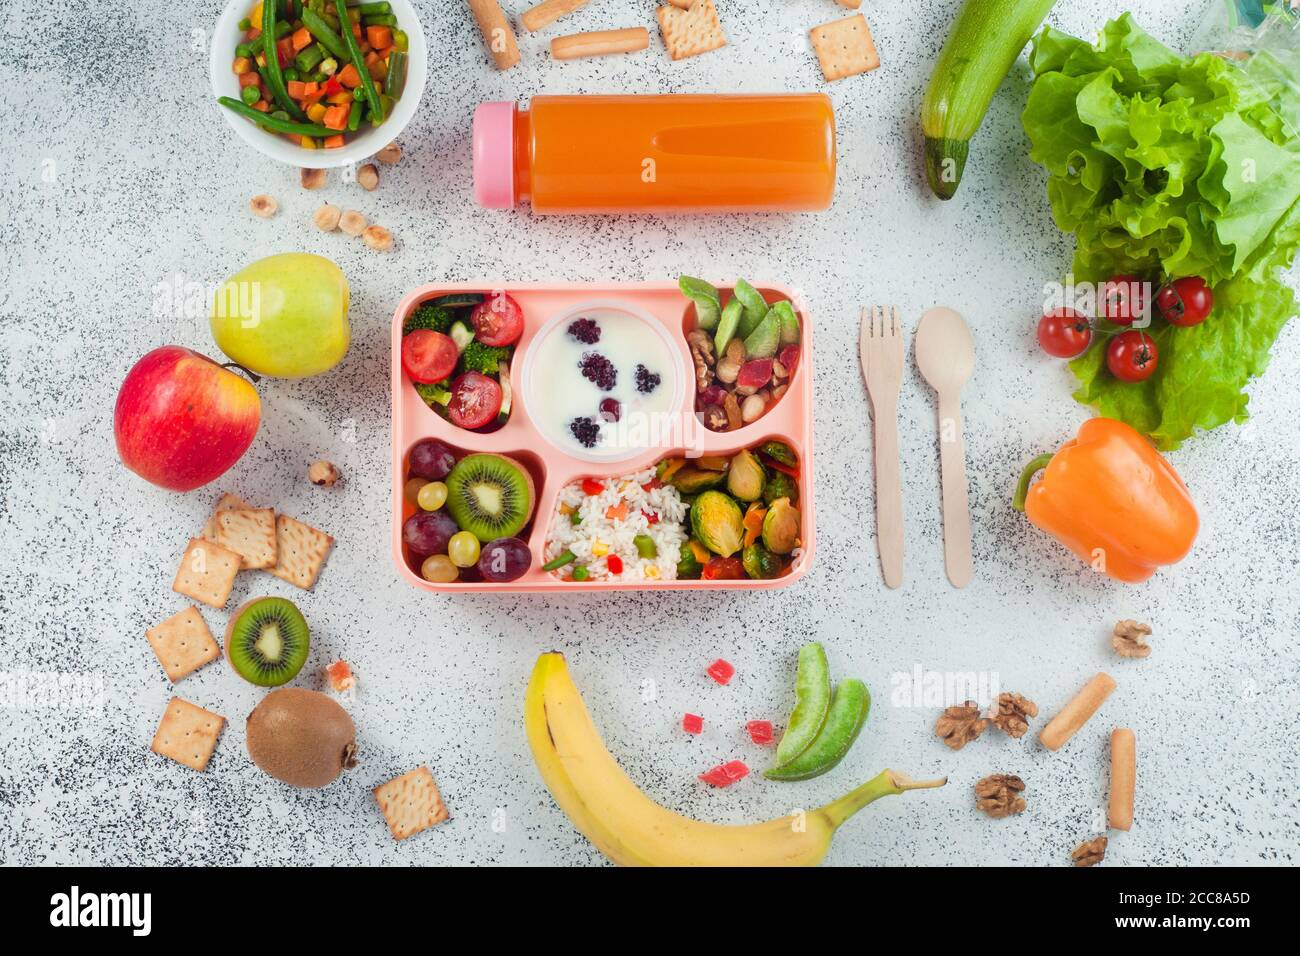 https://c8.alamy.com/comp/2CC8A5D/lunch-box-with-vegetable-salad-berries-in-yogurt-fruits-and-rice-on-grey-background-with-ingredients-2CC8A5D.jpg